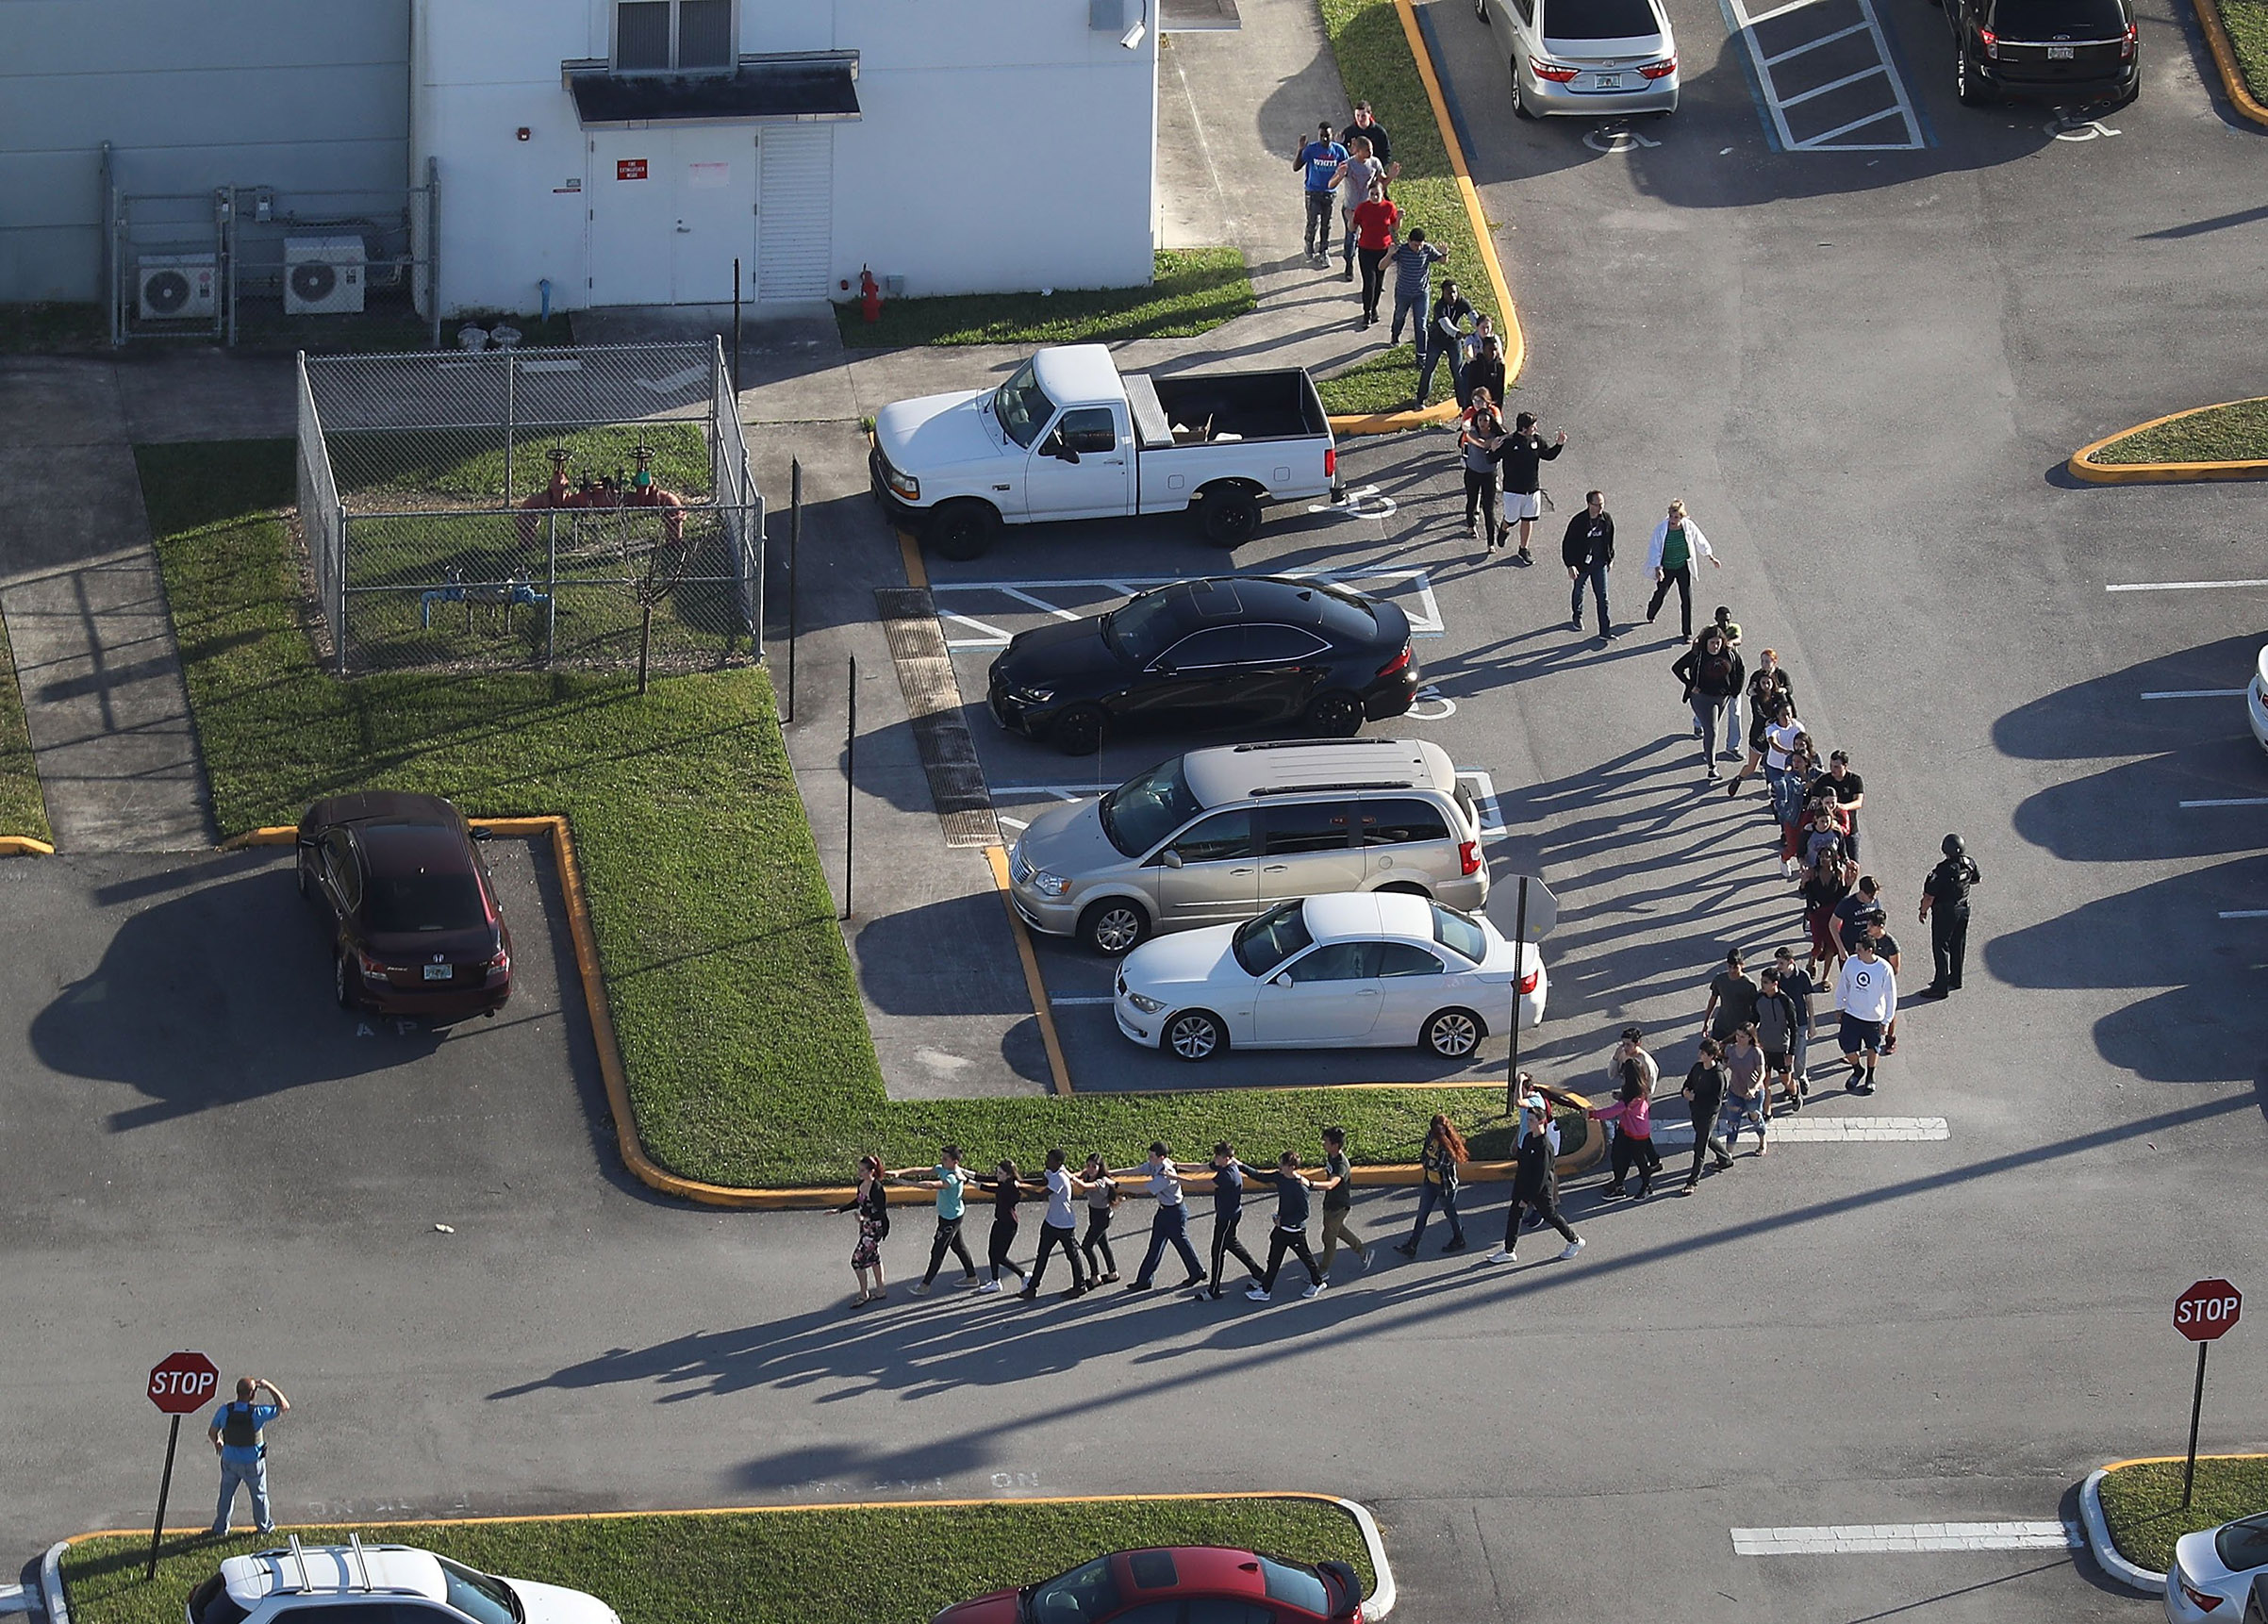 Students are evacuated from Marjory Stoneman Douglas High School in Parkland, Fla., on Feb. 14, after a shooting left at least 17 people dead. (Joe Raedle—Getty Images)